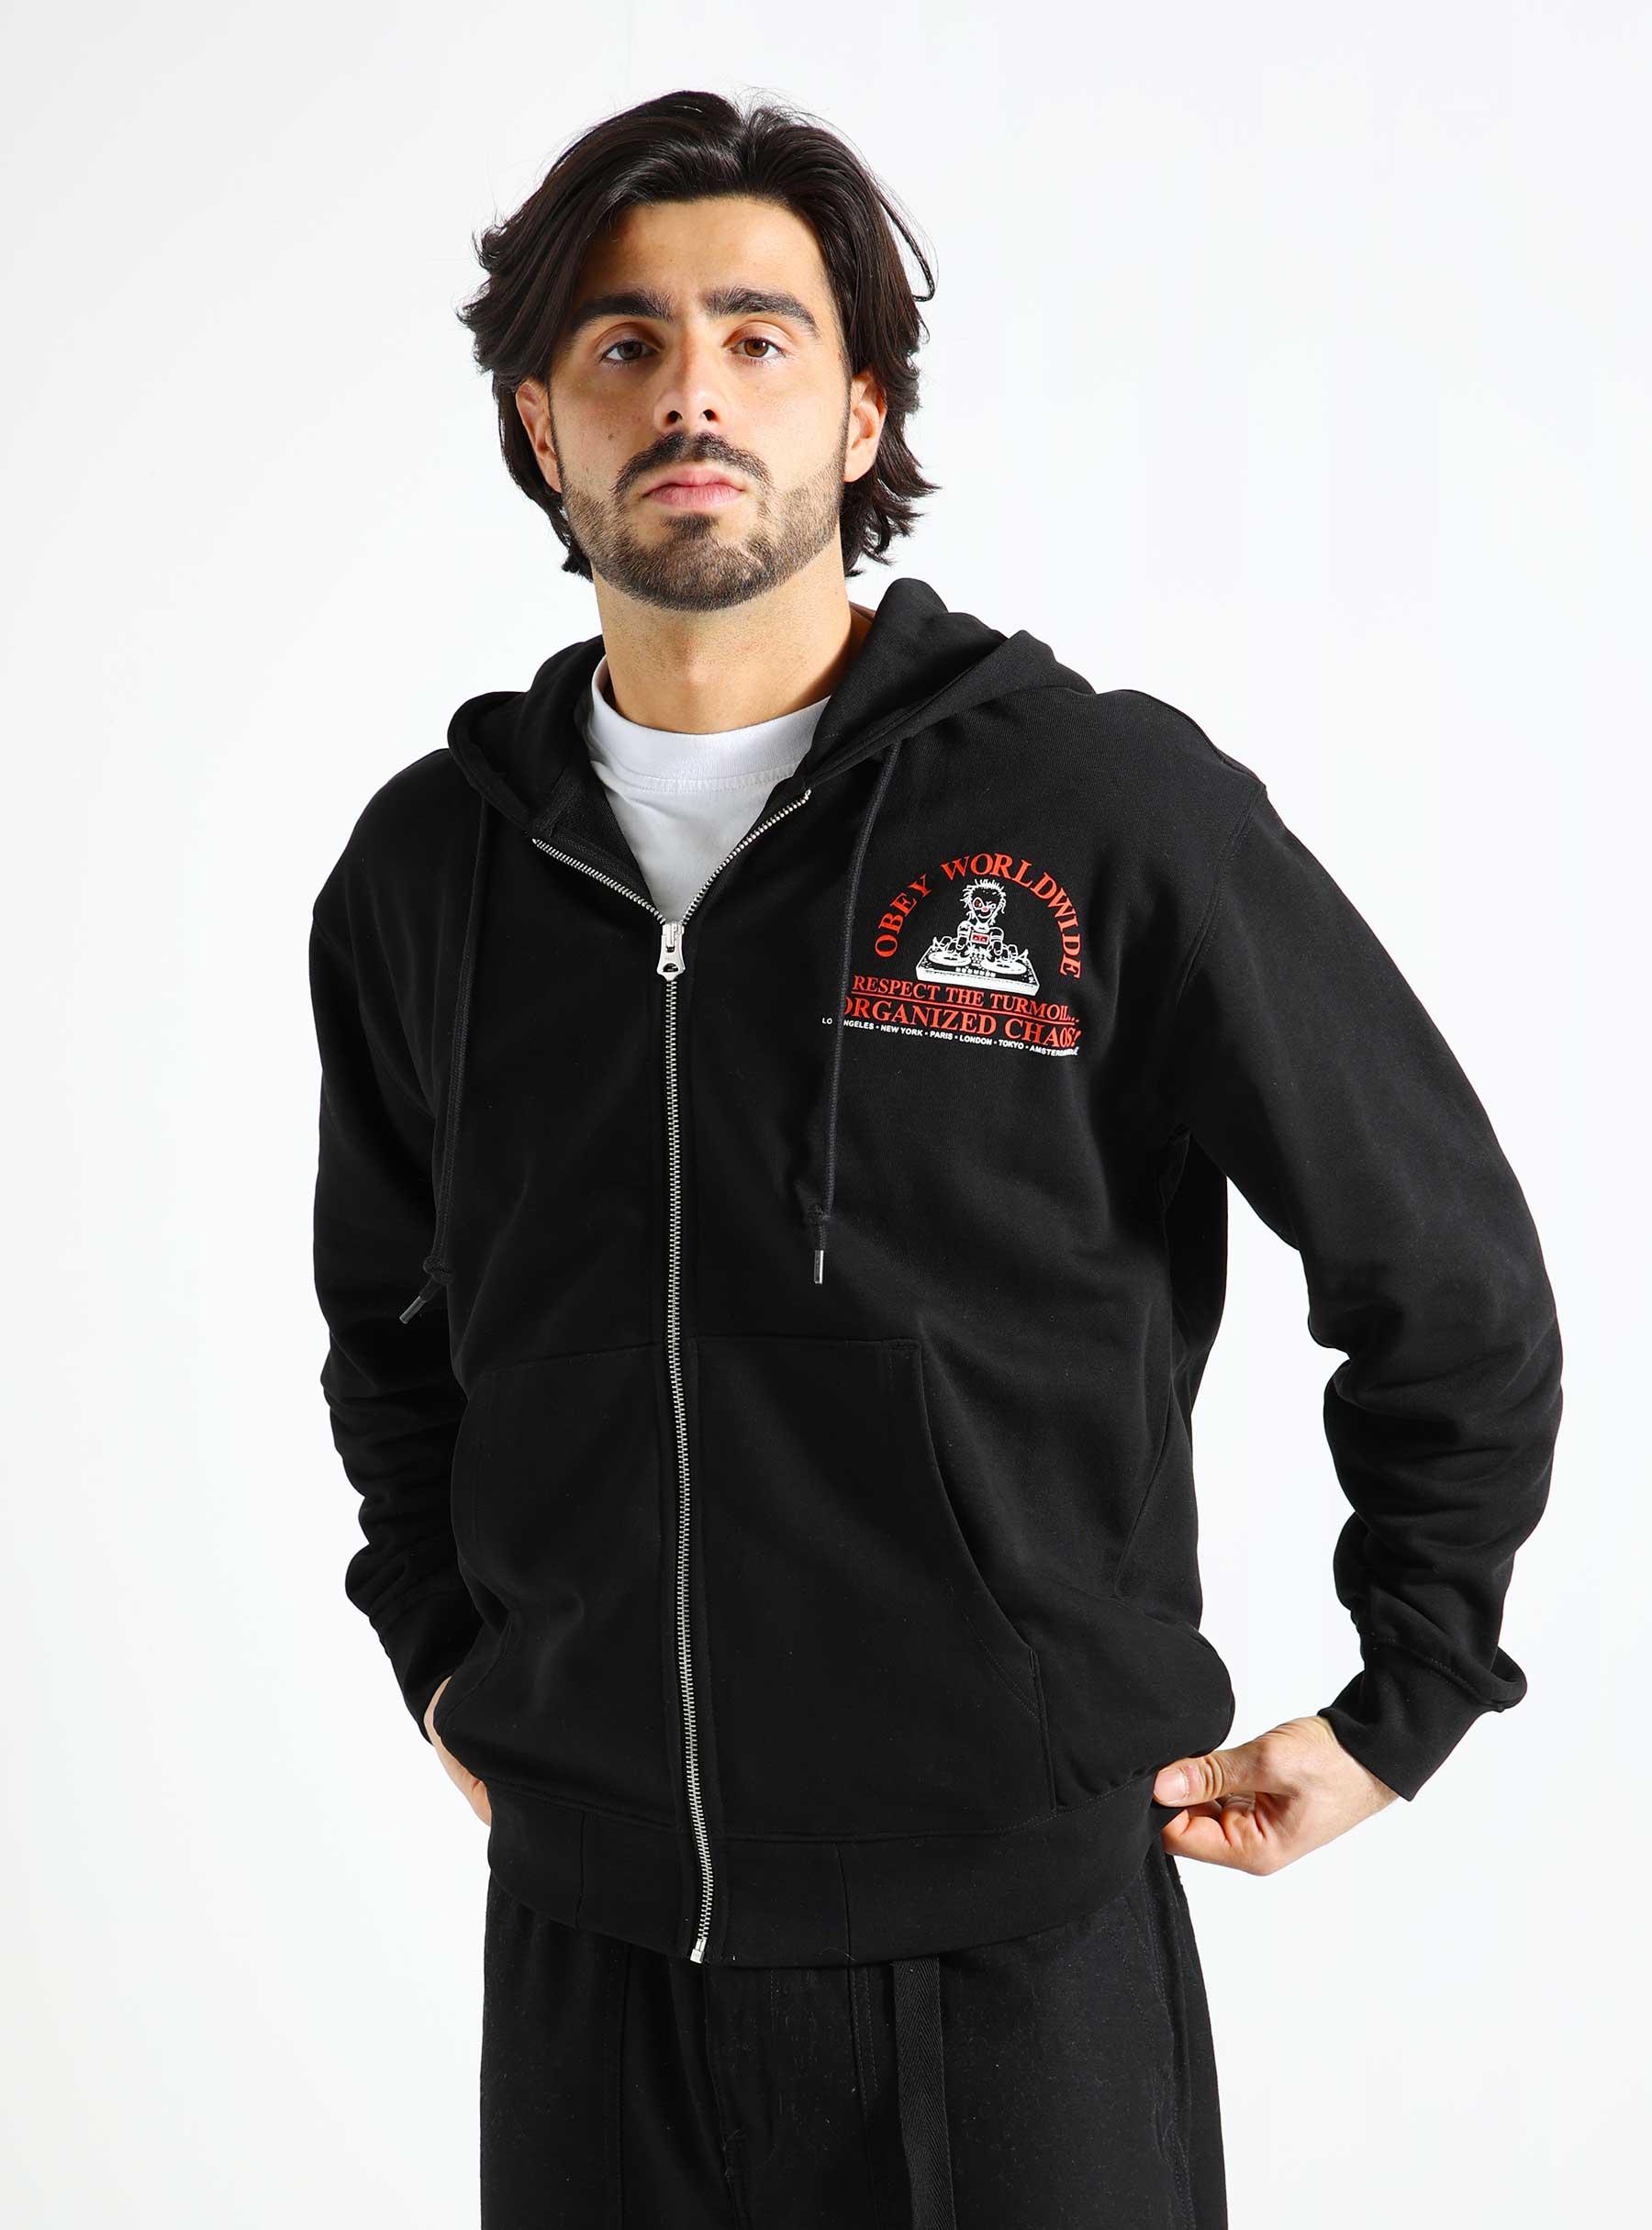 Obey Organizied Chaos Hoodie Black 117483707-BLK